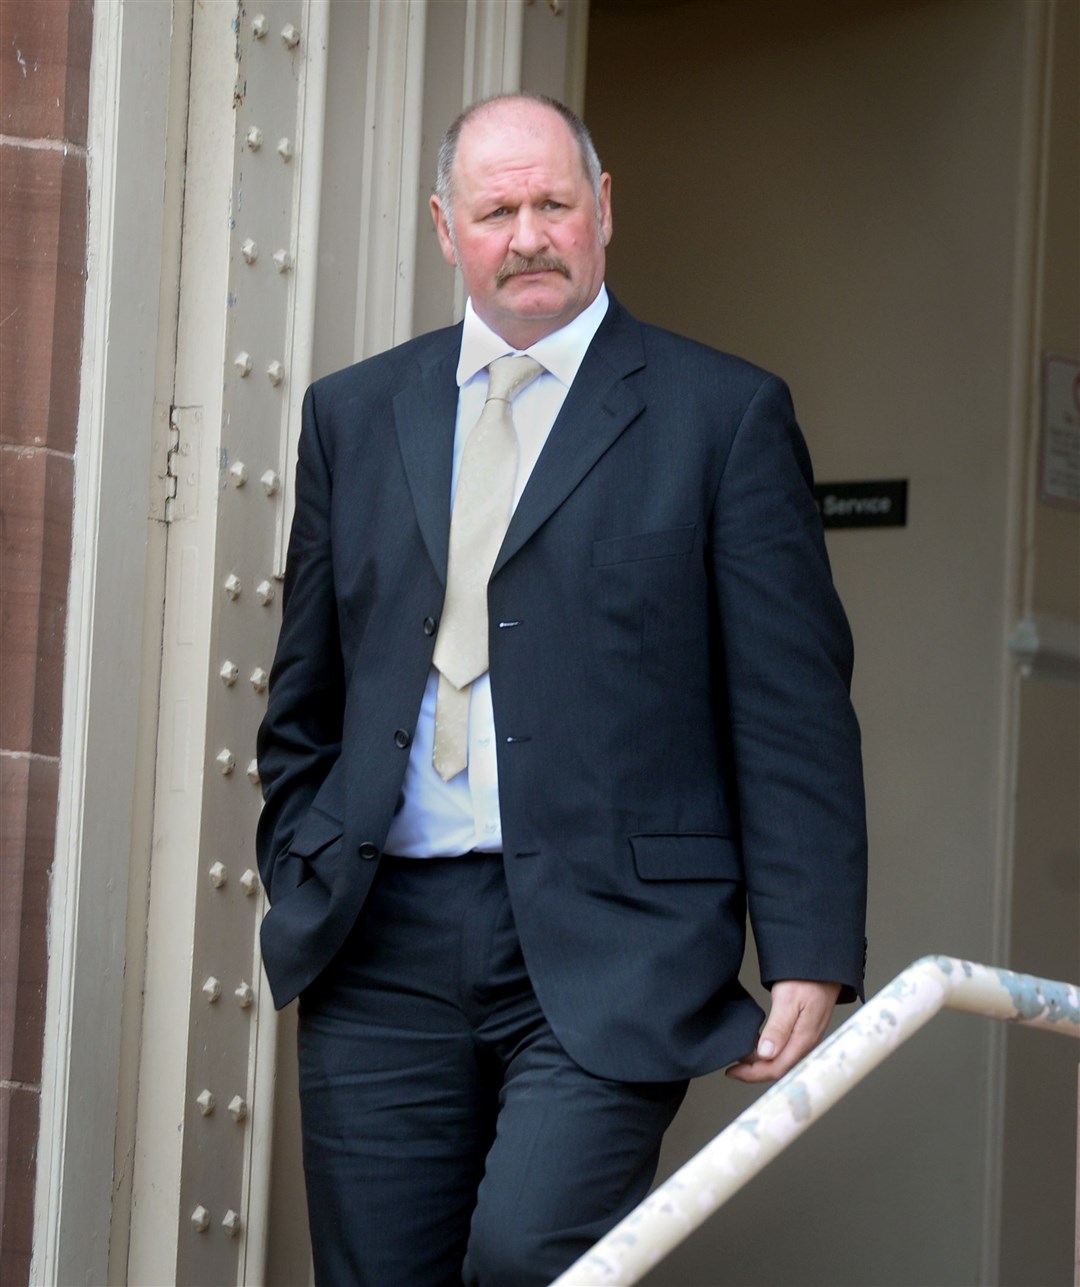 David Carey, pictured outside the court, was found guilty after a trial of sexual assault of a woman who had been suffering from dementia.